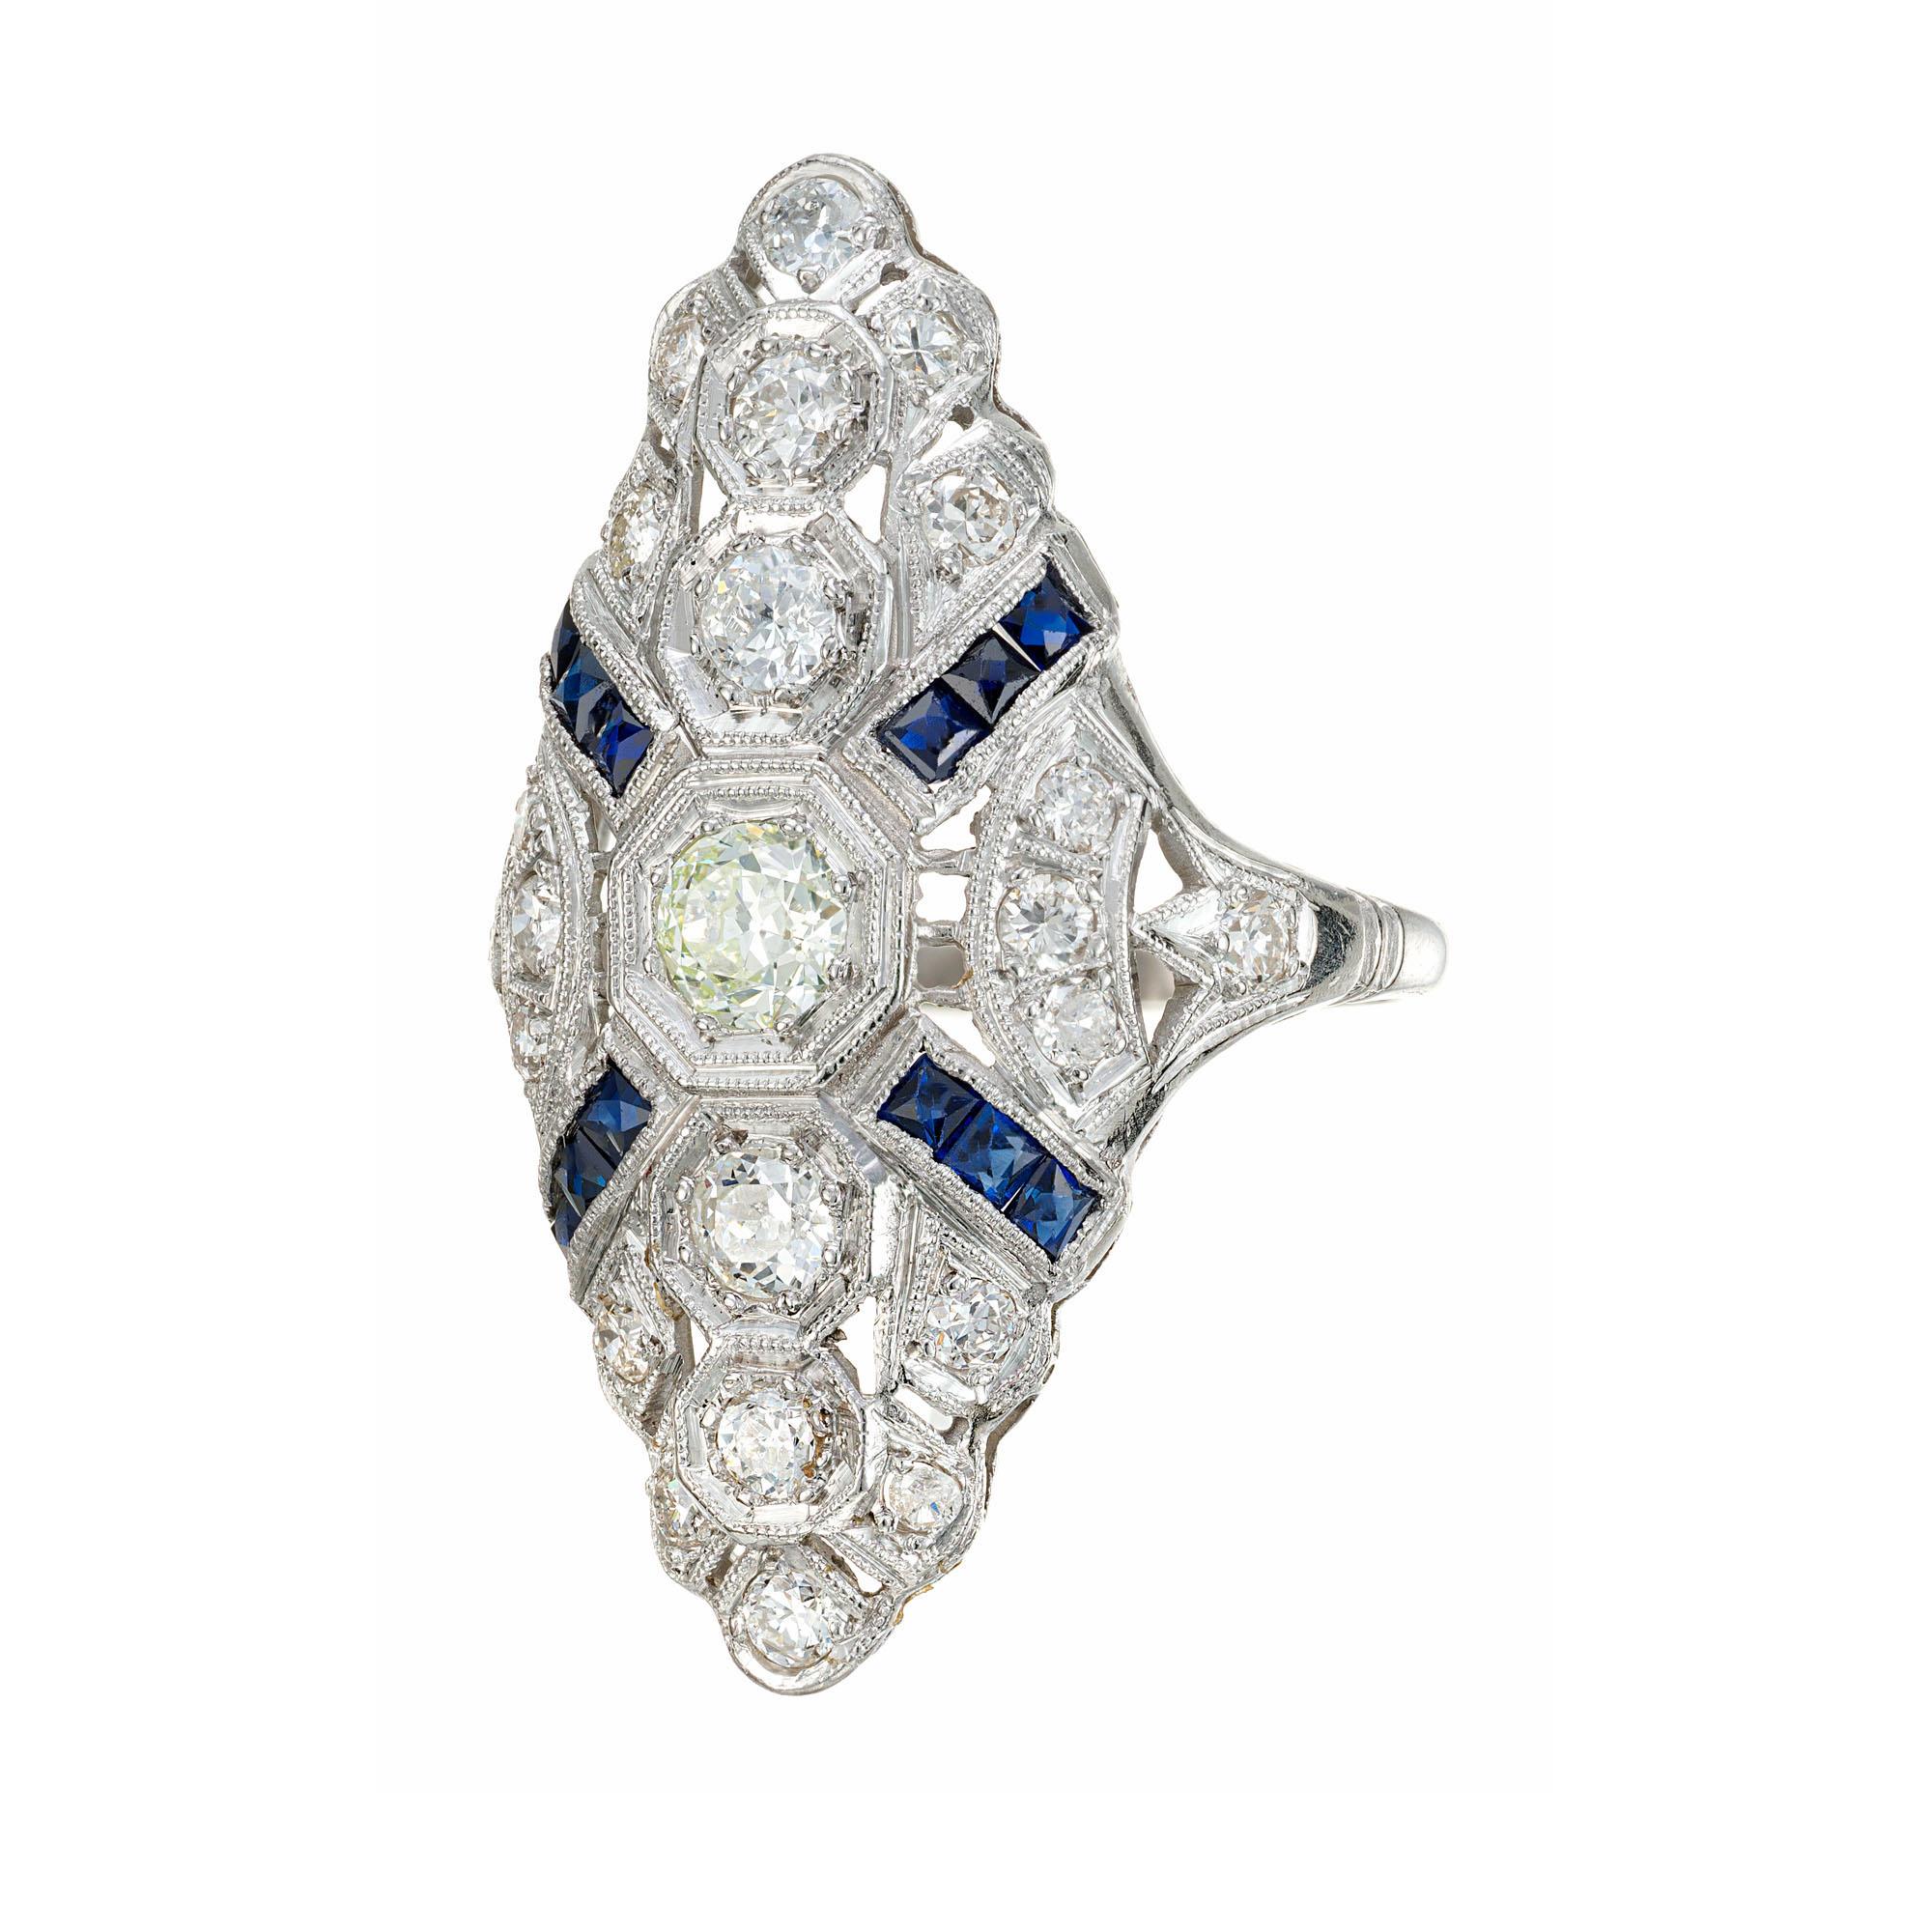 Marquise shaped 1940's filigree shape platinum cocktail ring with 23 round European cut diamonds and 12 French cut sapphires. 

23 round European cut diamonds, H-I SI approx. .68cts
12 French cut blue sapphires, approx. .25cts
Size 7 and